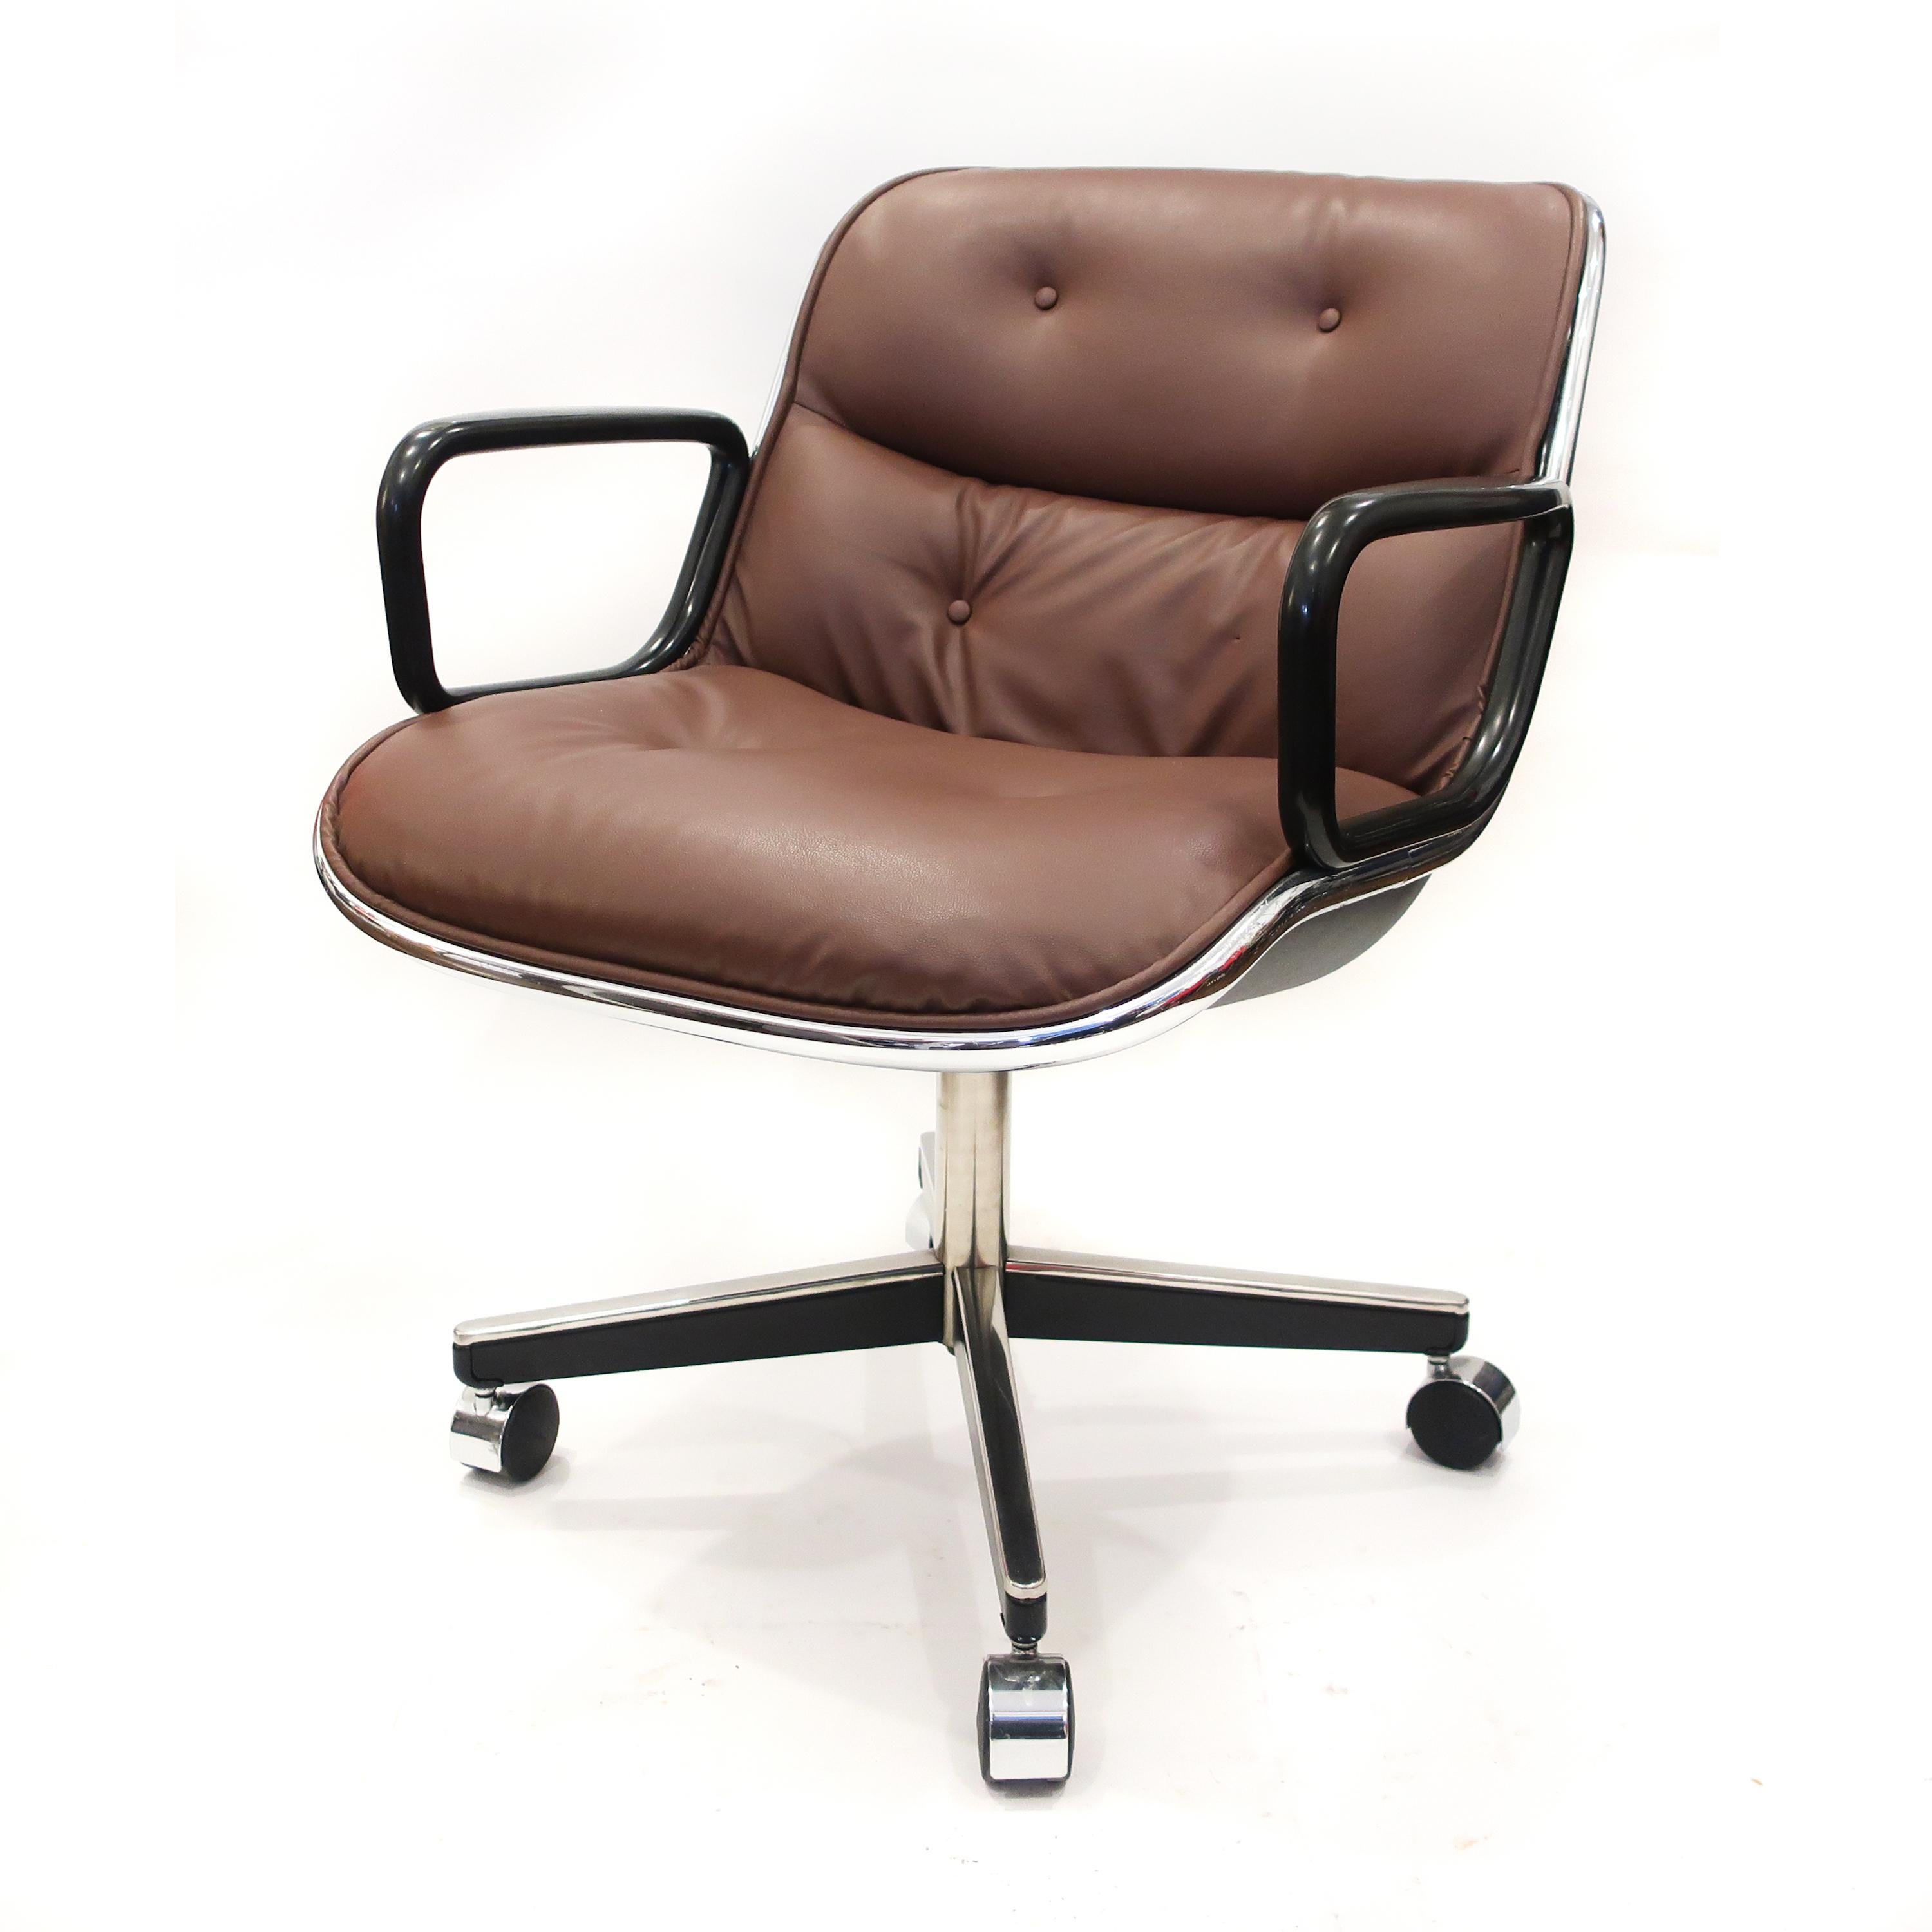 Designed by Charles Pollock (an apprentice of George Nelson) in 1963 for Knoll, the Pollock Executive Chair is both a true stylish classic of modern design and it’s comfortable! Featuring what Pollock described as “rim technology” - the use of a